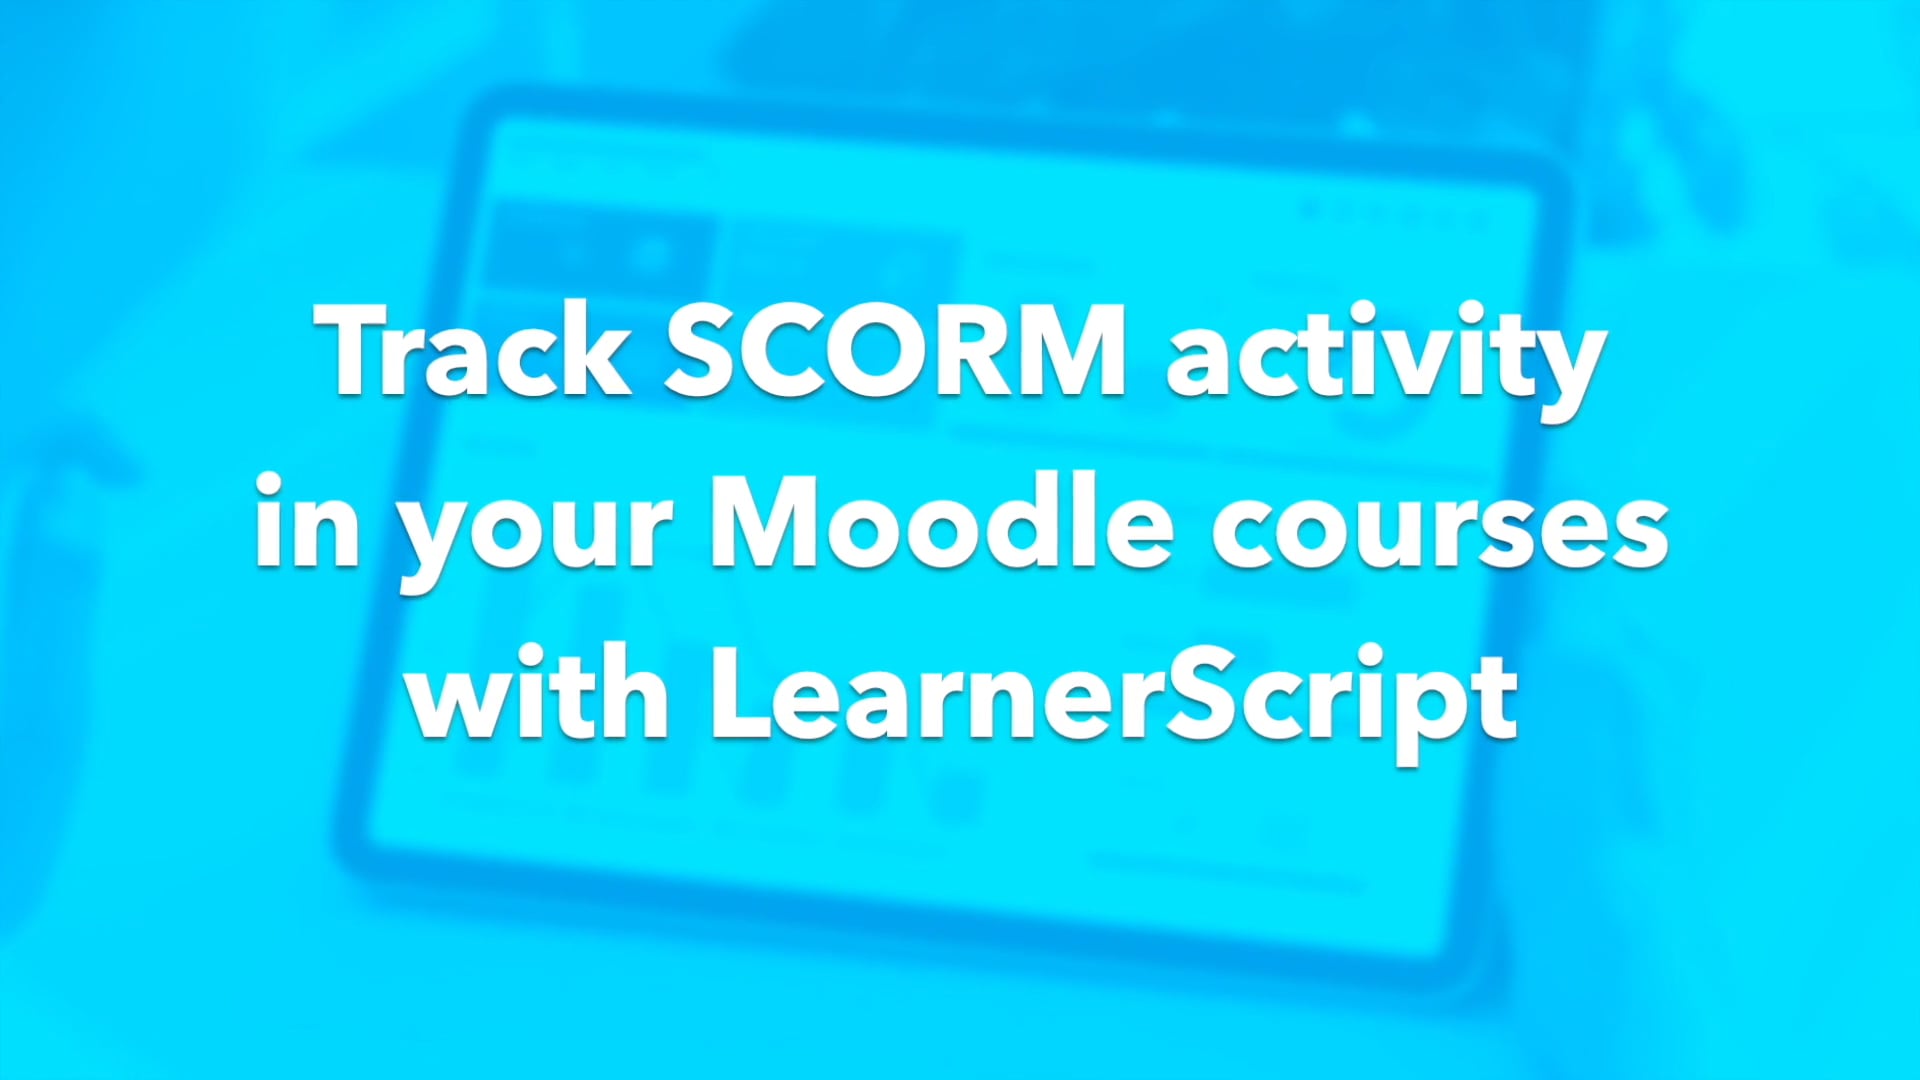 Track SCORM analytics with LearnerScript